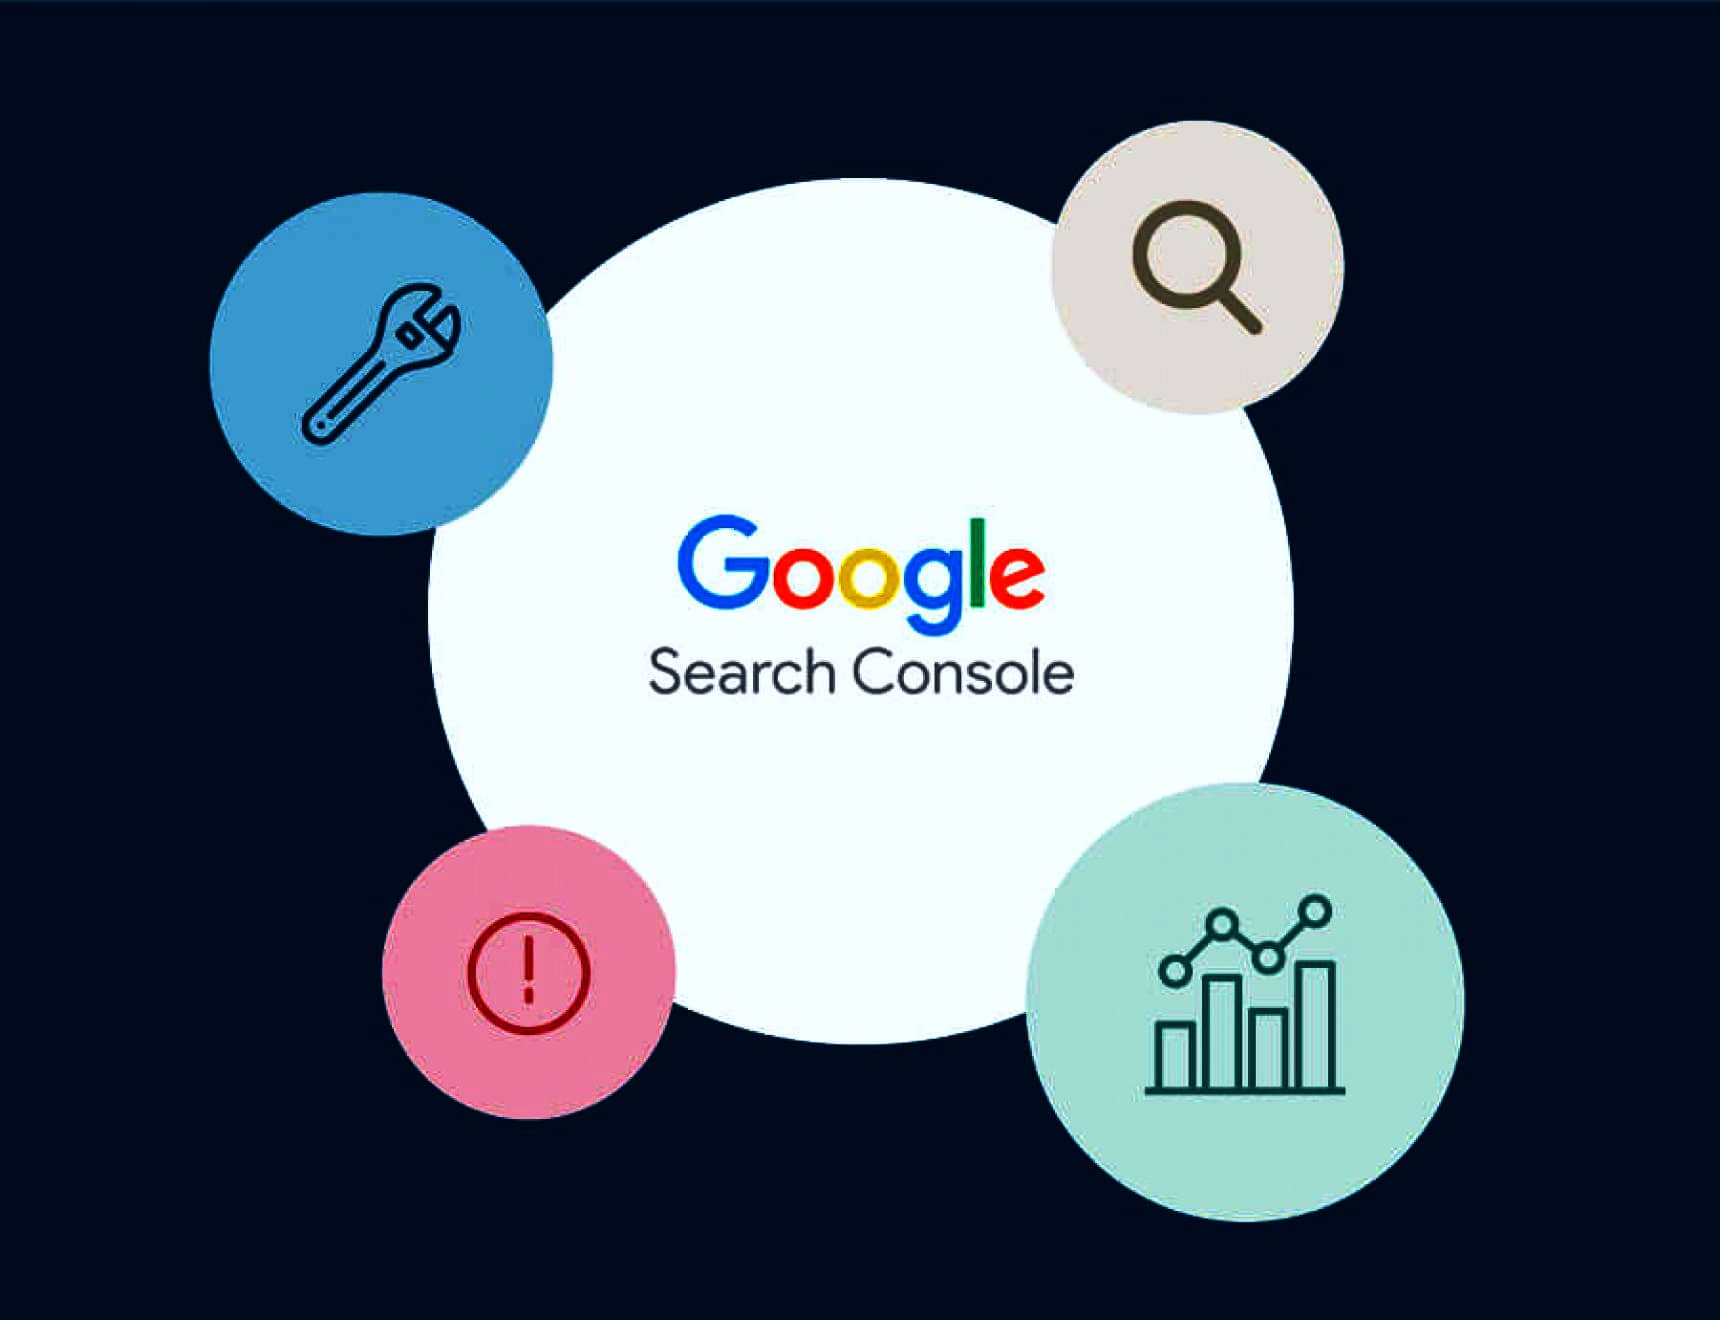 Google Search Console The Powerful Evidence for Search Engines on 2023